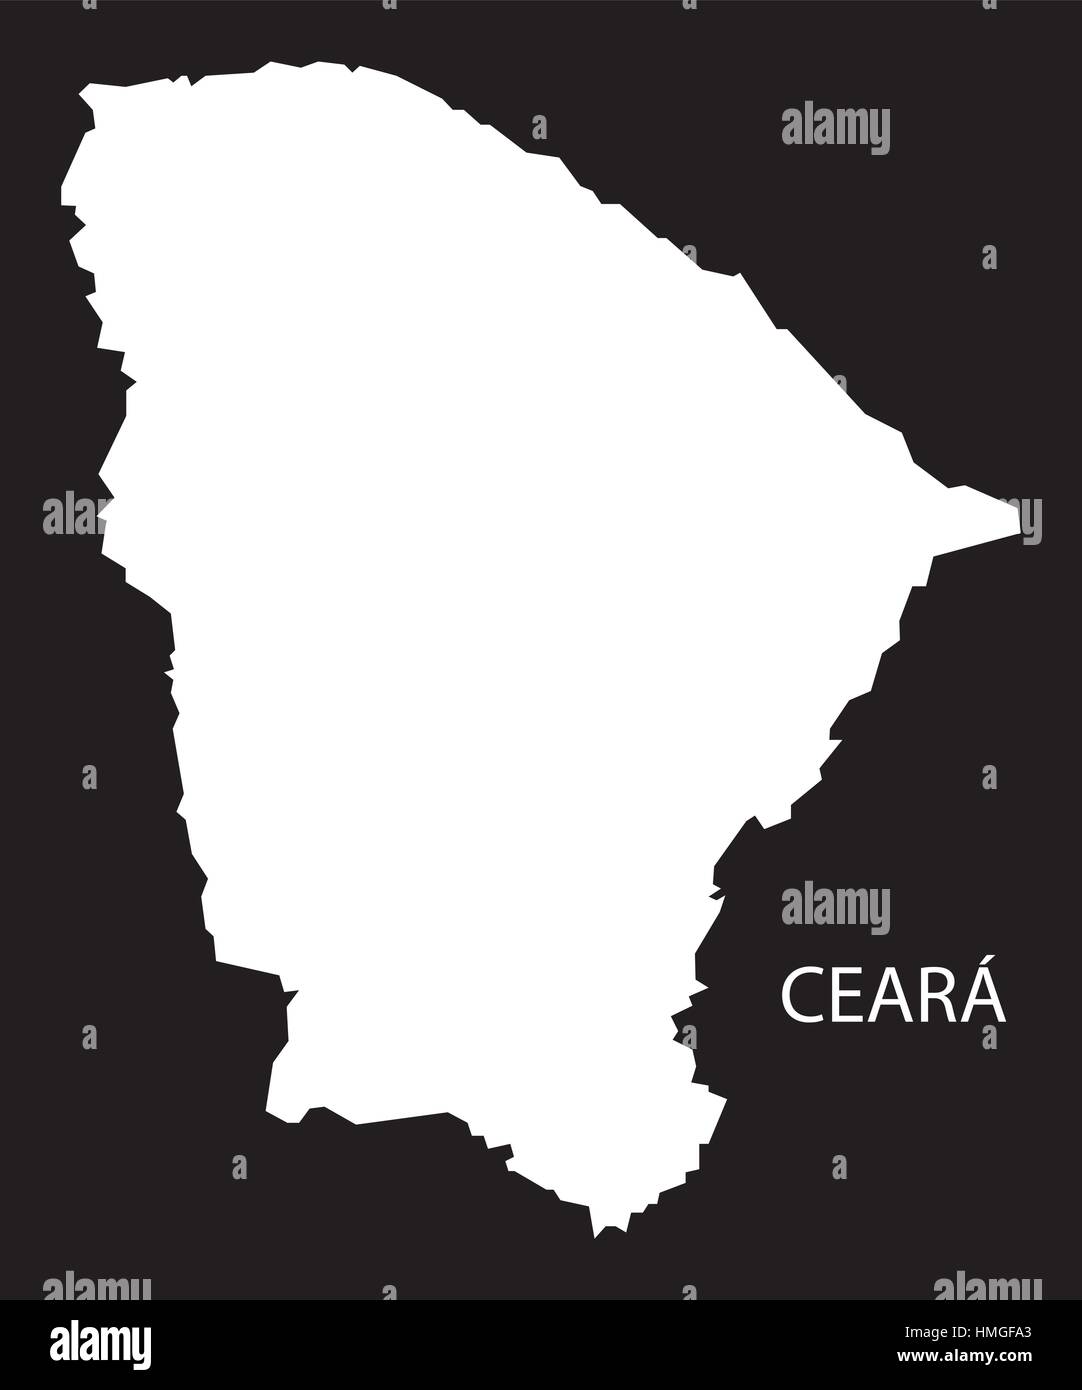 Ceara Brazil Map black inverted silhouette Stock Vector